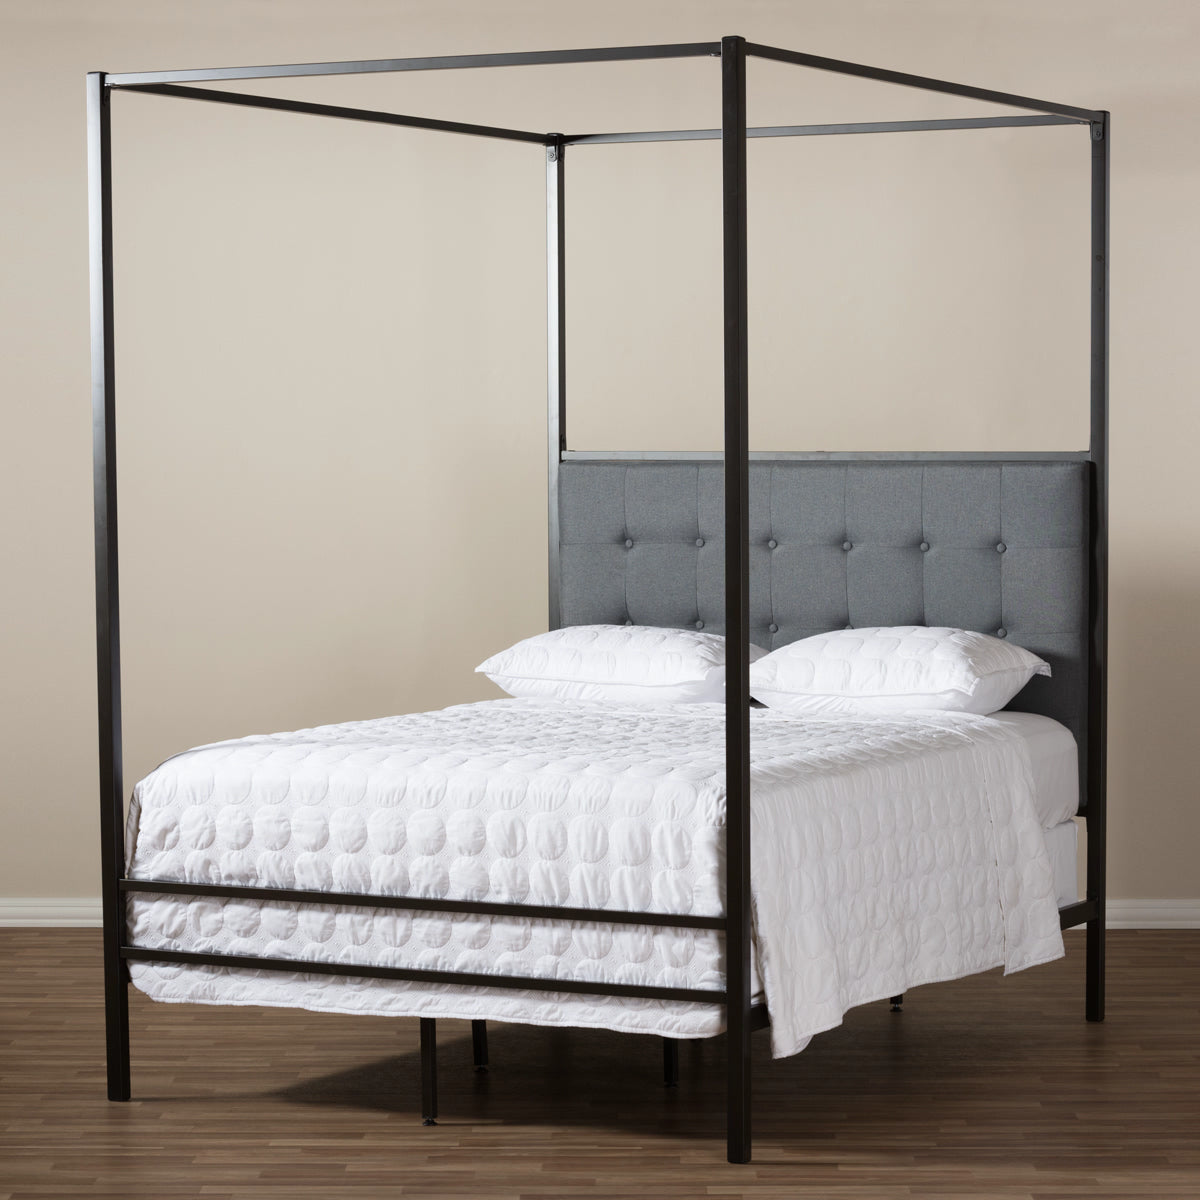 Baxton Studio Eleanor Vintage Industrial Black Finished Metal Canopy Queen Bed Baxton Studio-Queen Bed-Minimal And Modern - 7